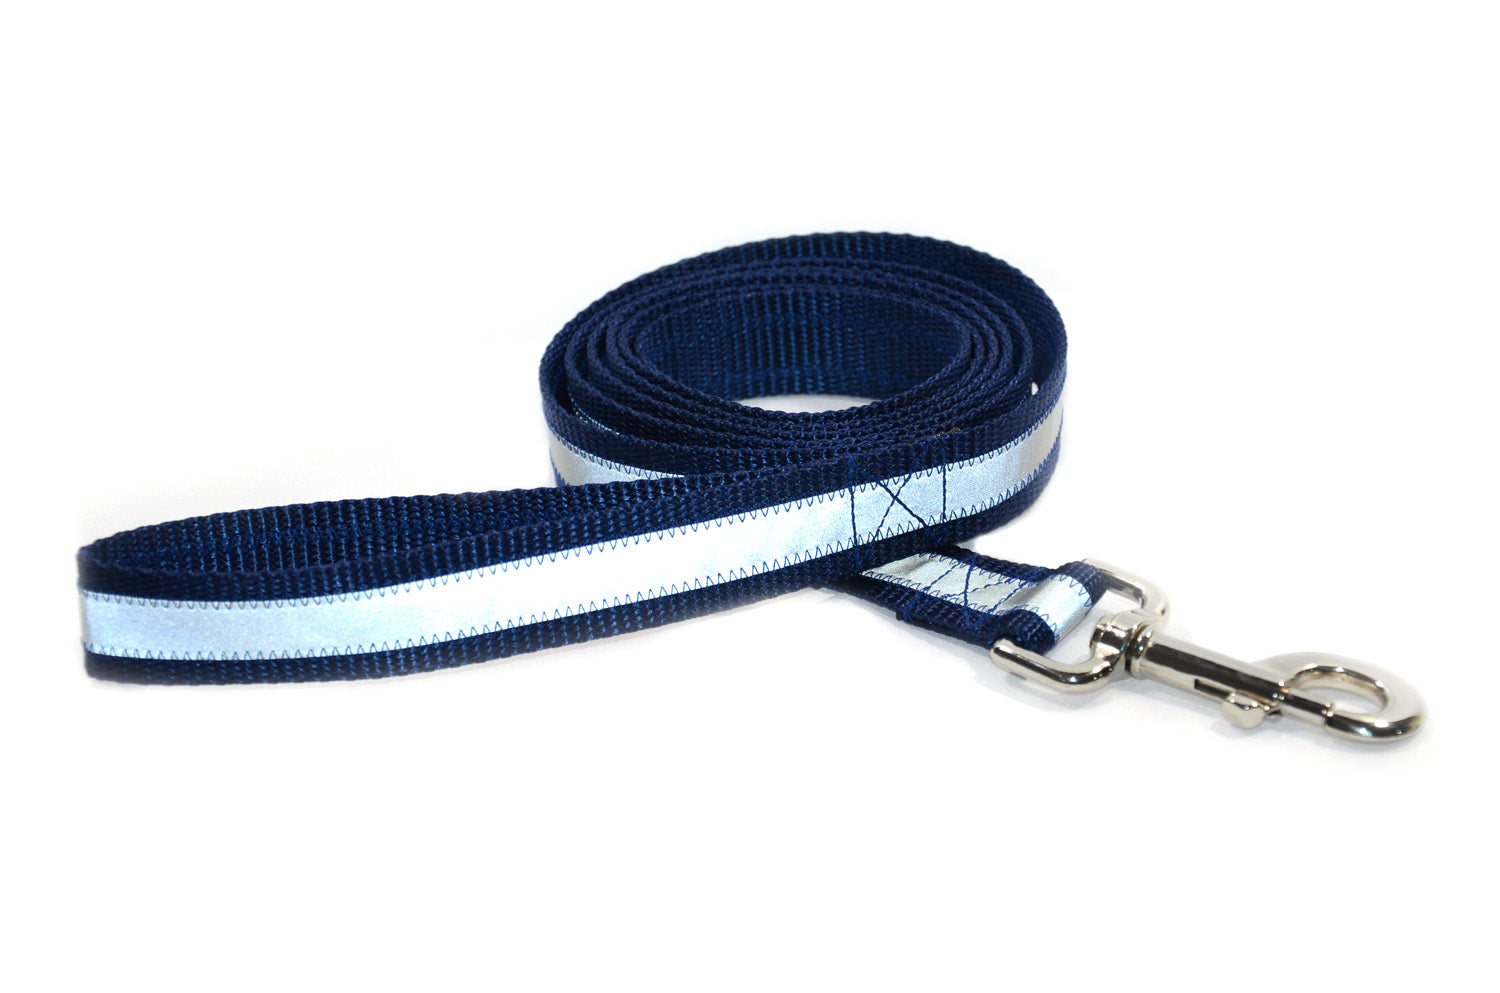 Reflective OR Solid Leashes - heavy duty webbing - made in the USA! - Fox Valley Pet Wear